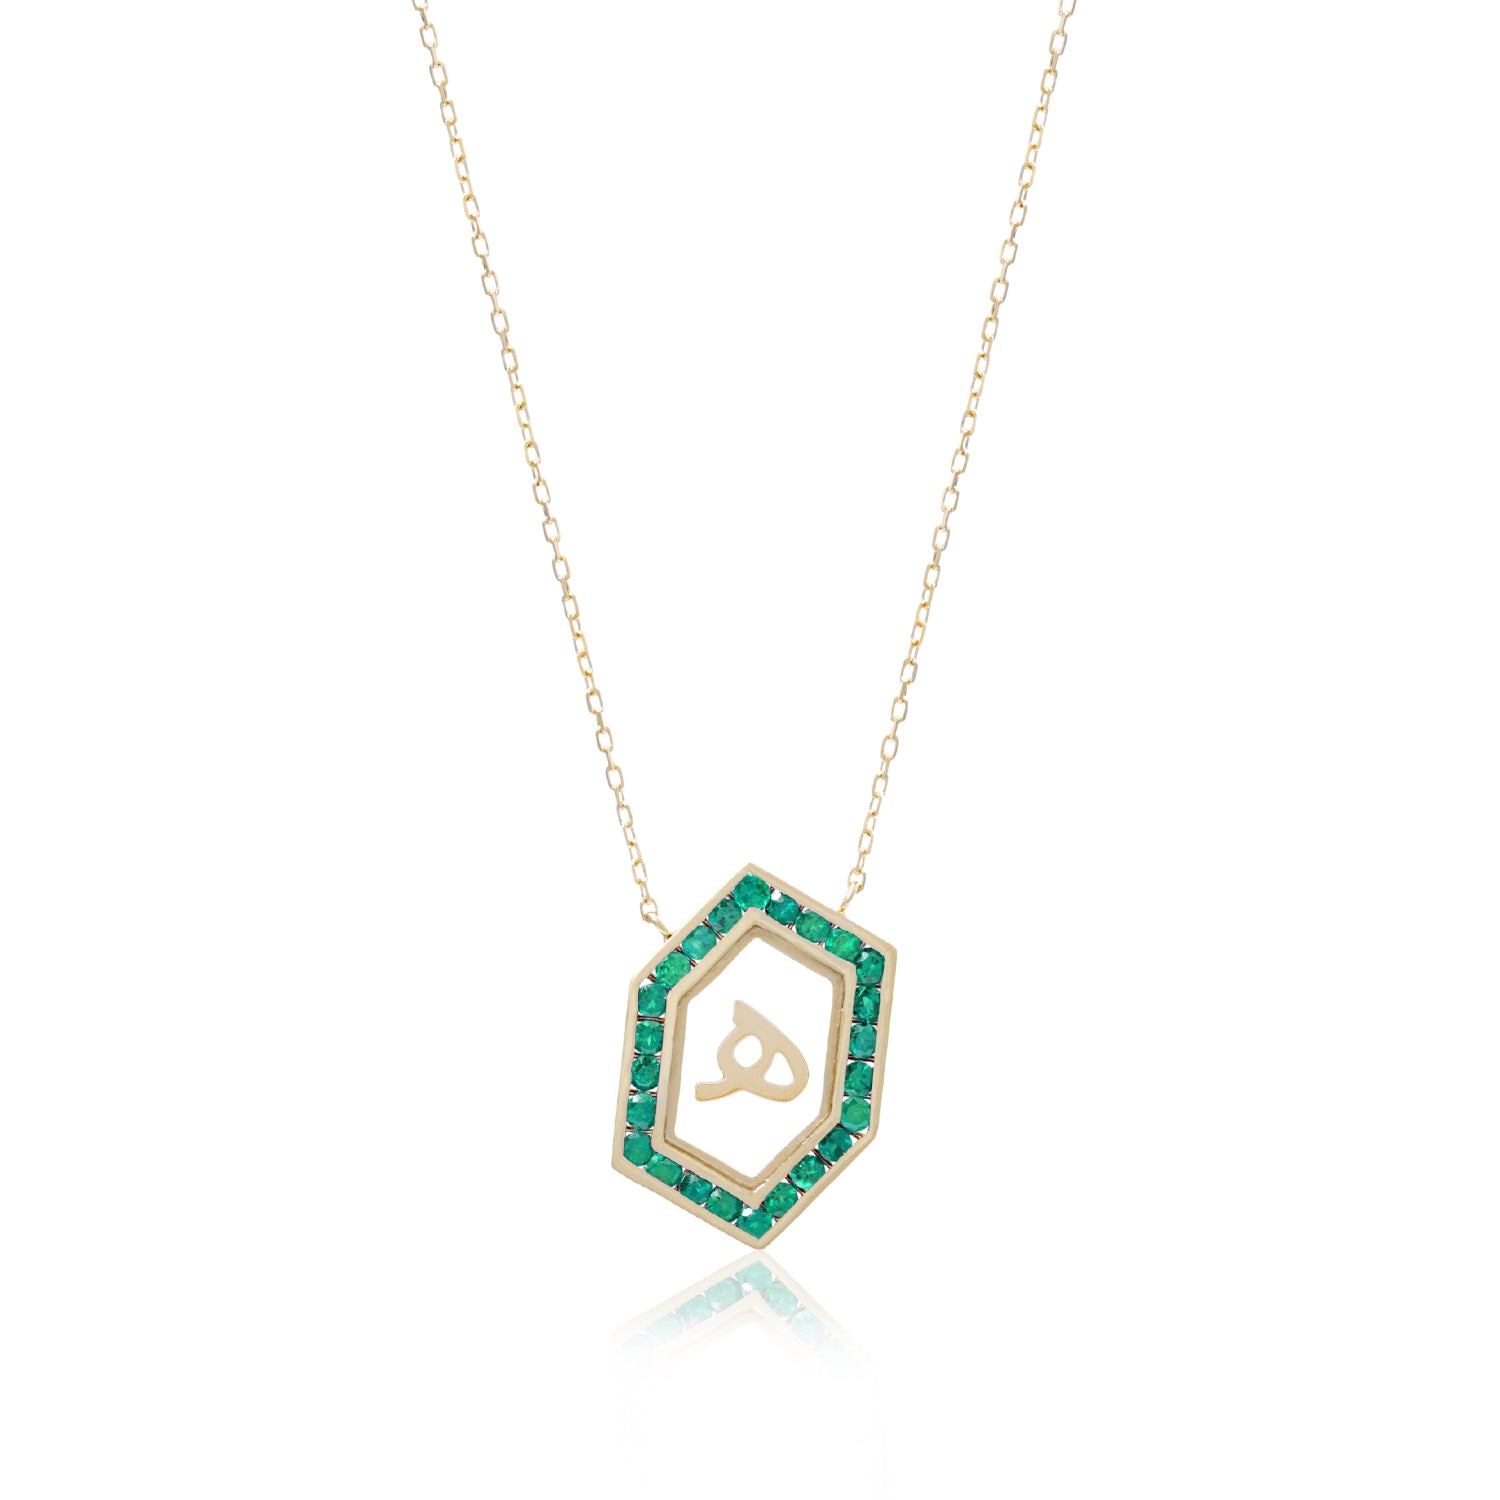 Qamoos 1.0 Letter هـ Emerald Necklace in Yellow Gold